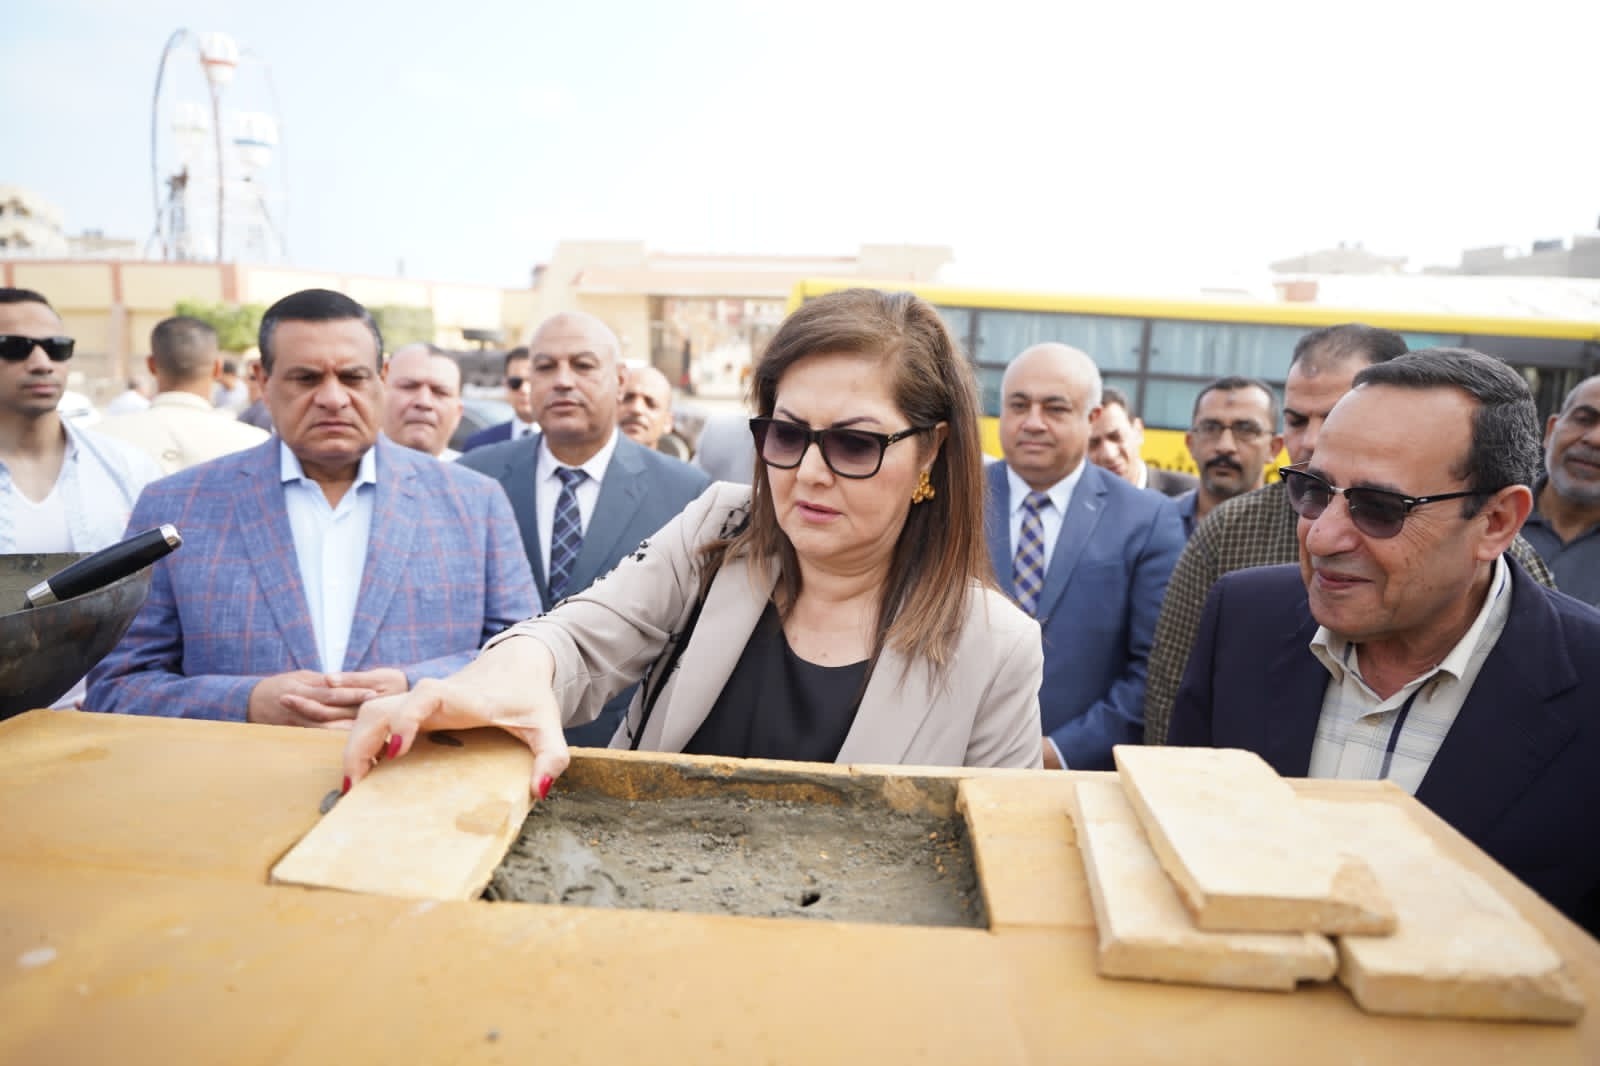 The Minister of Planning lays the foundation stone for the Egypt Services Center in Arish